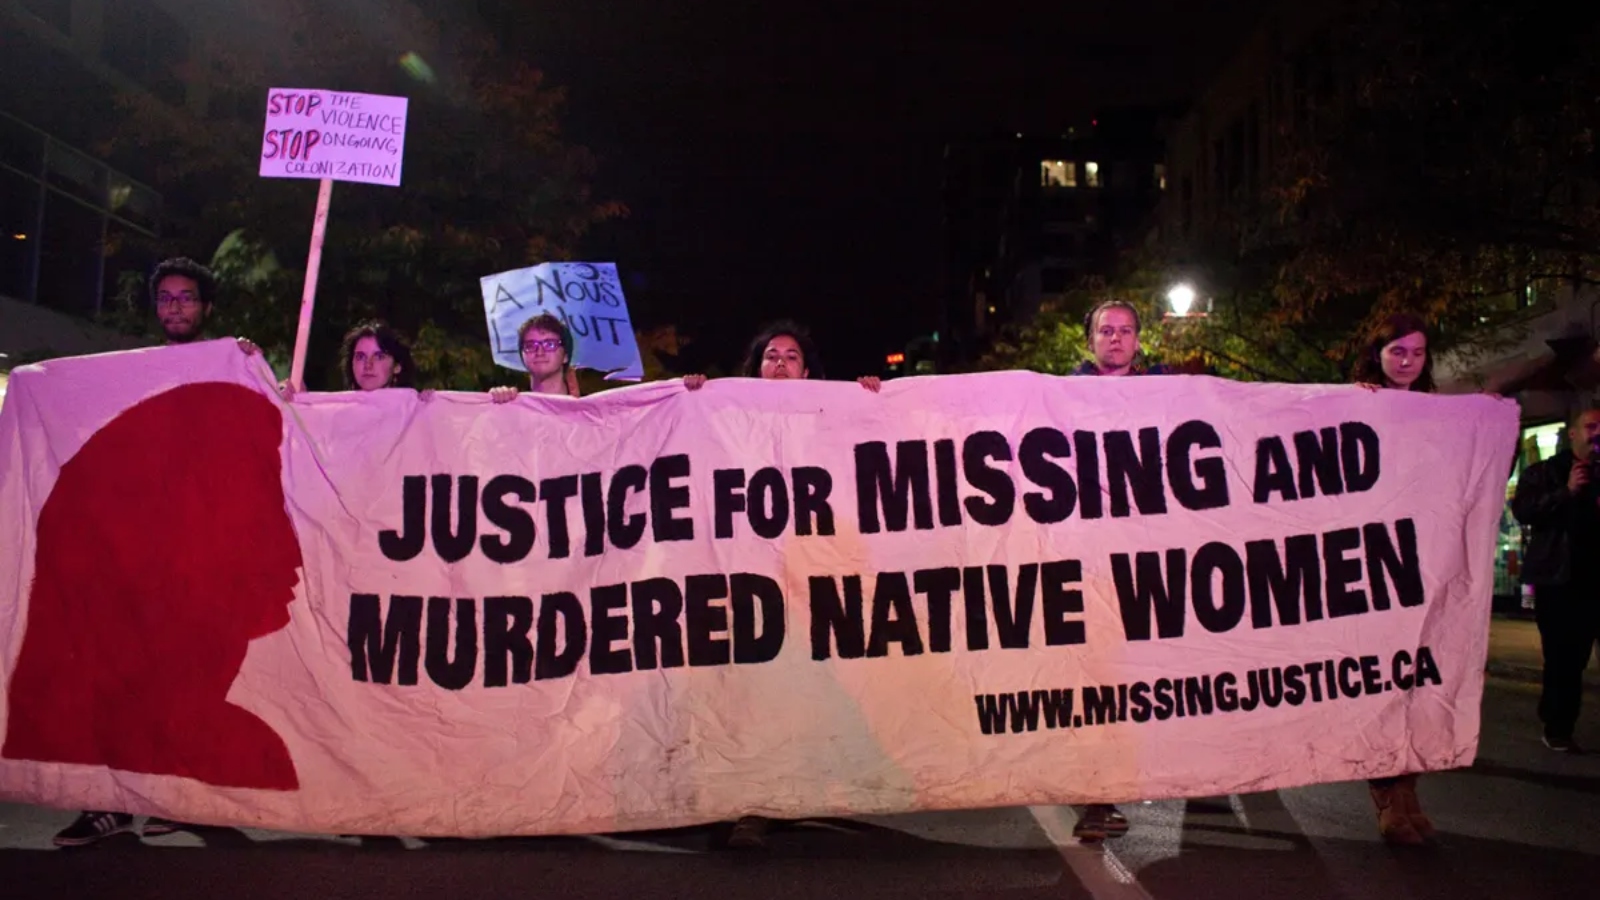 The Justice for missing and murdered native women movement